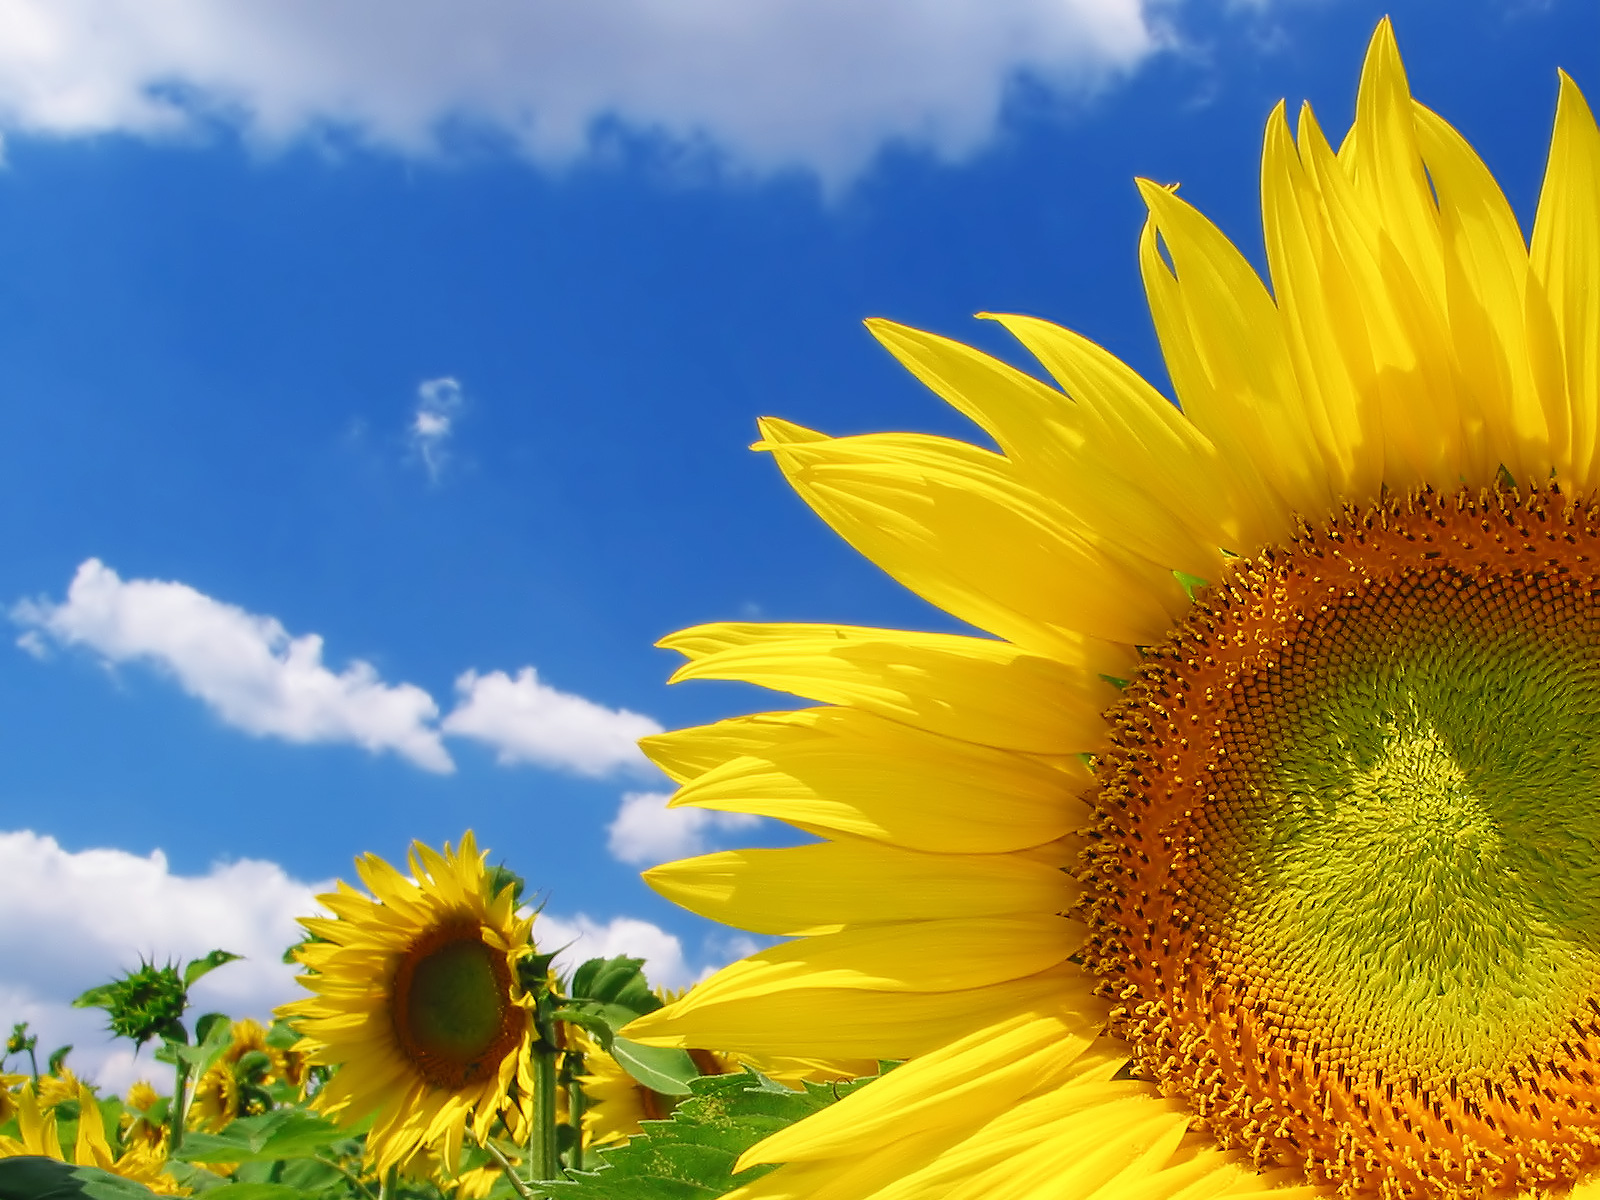 flower Wallpaper High Definition HQ Sun flower pictures high quality